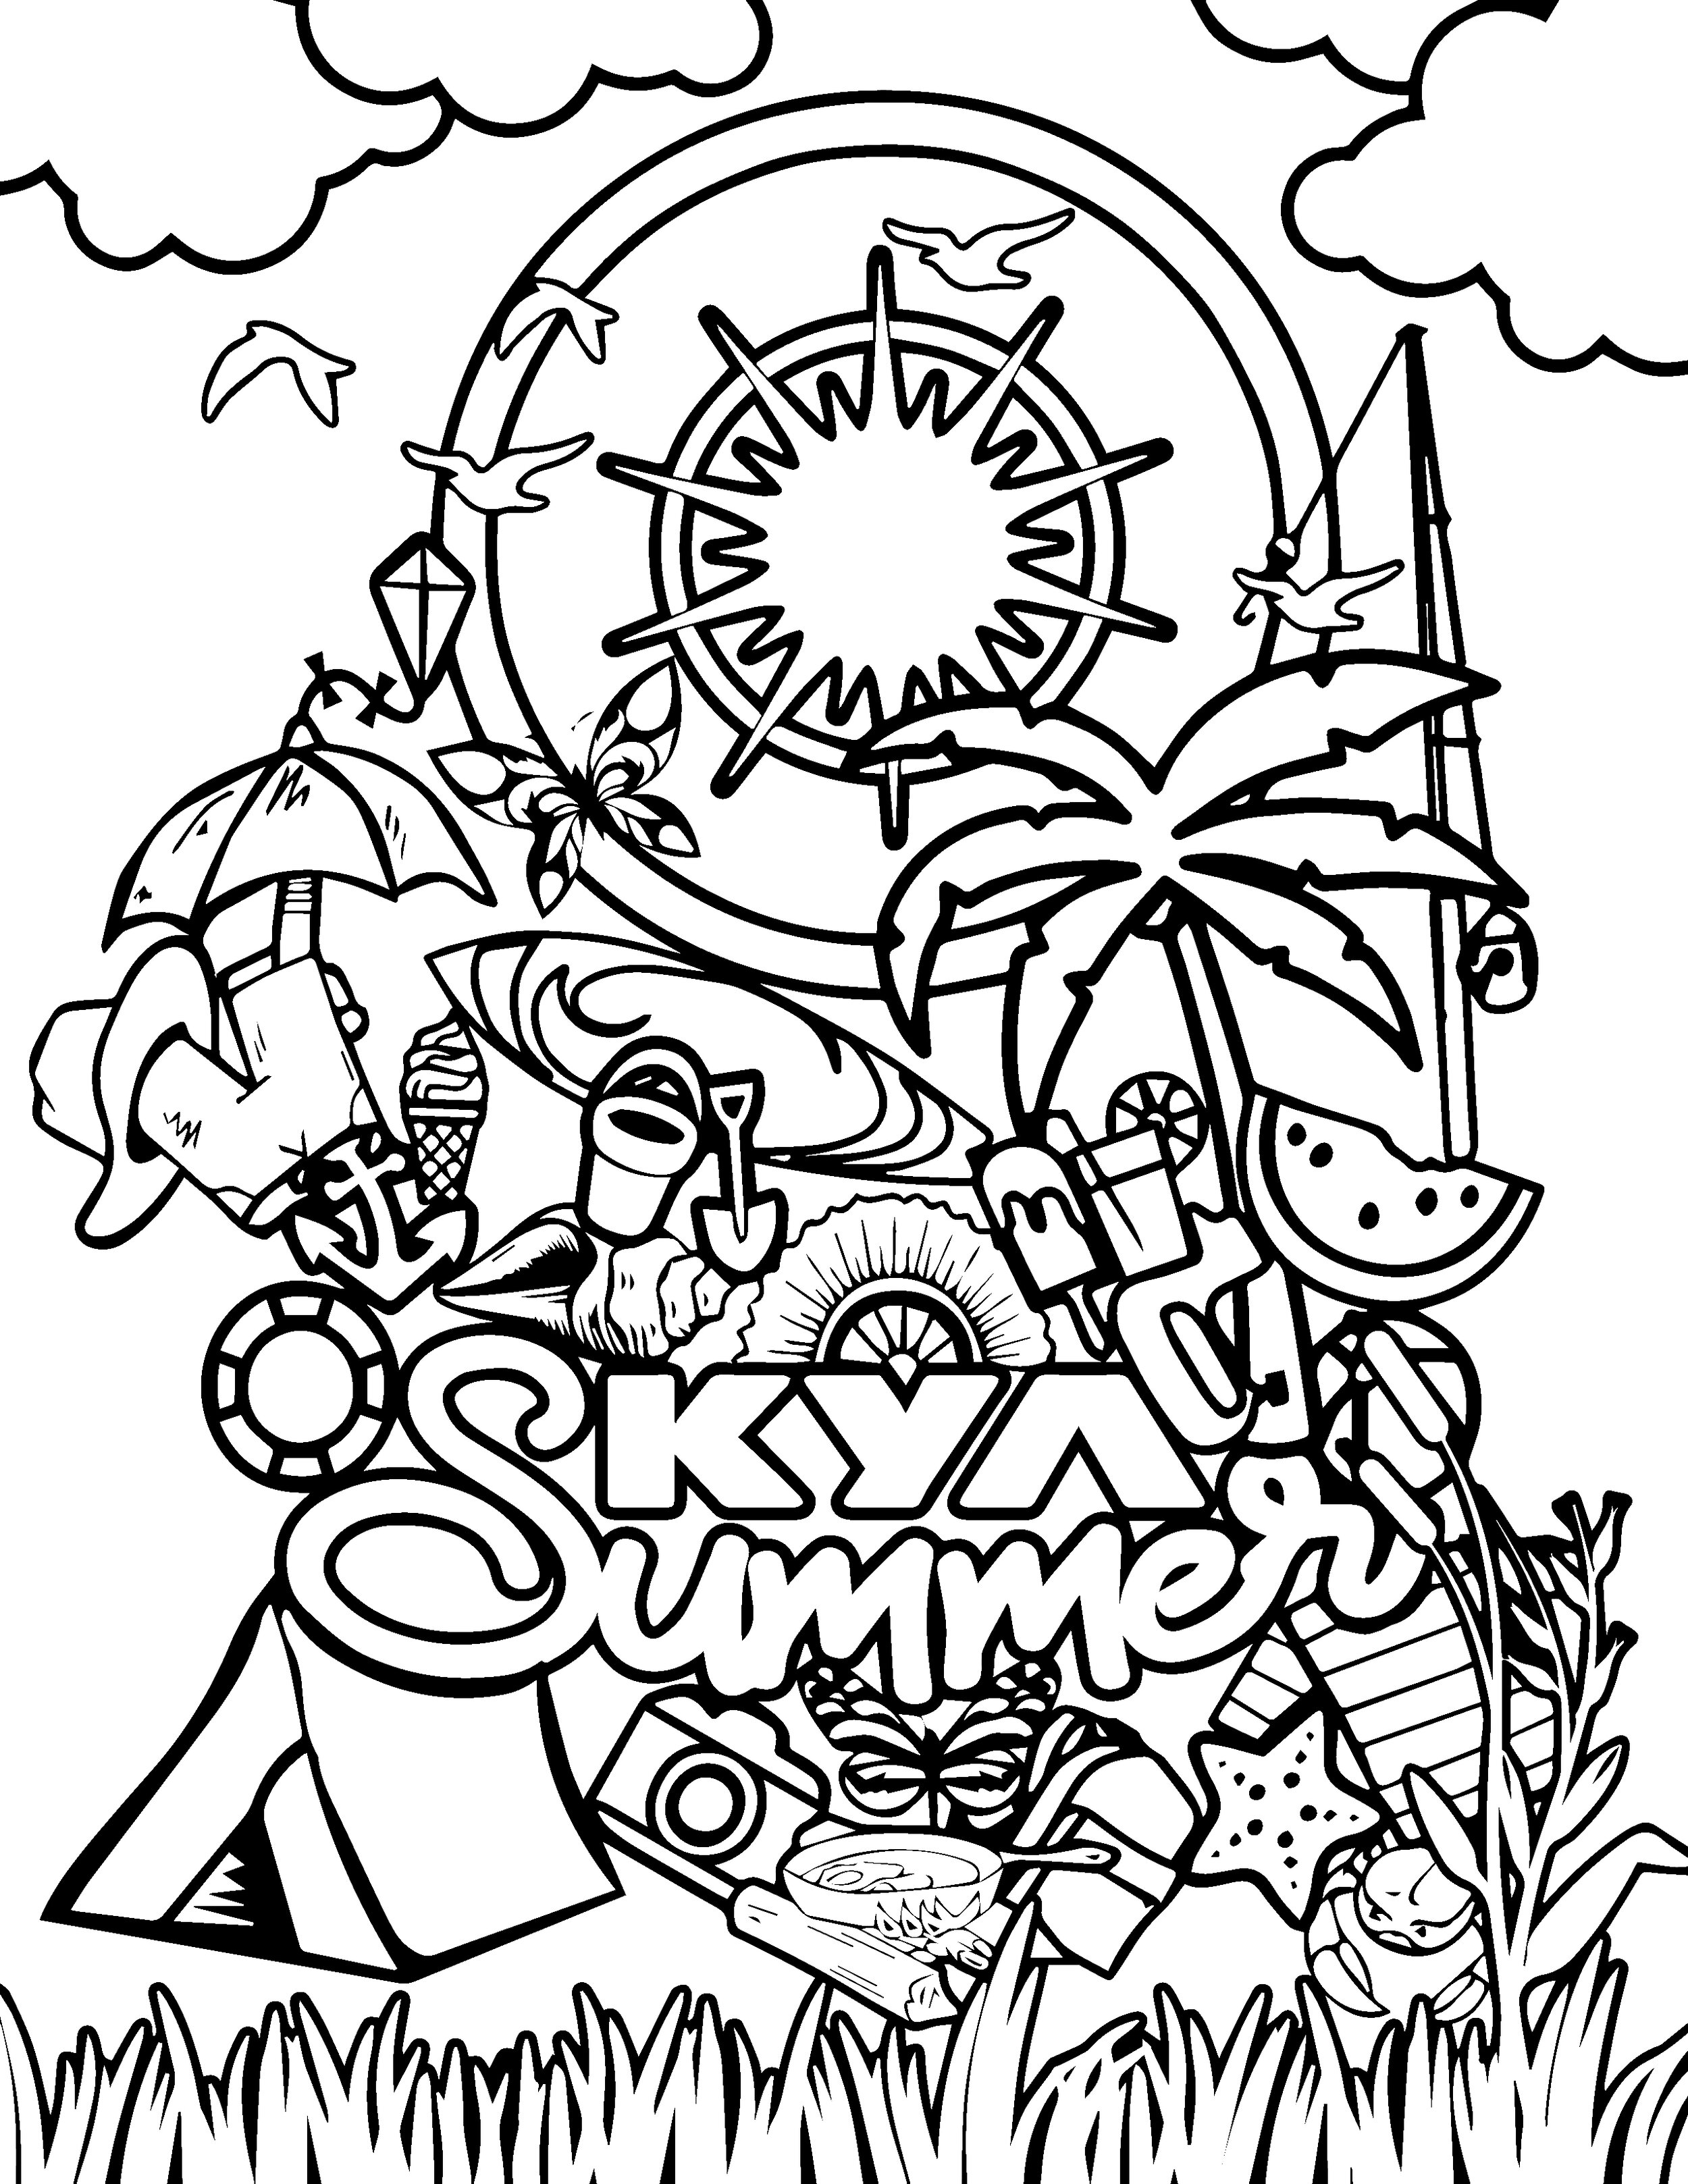 Just for fun strongcoloring page to celebrate summer â kya